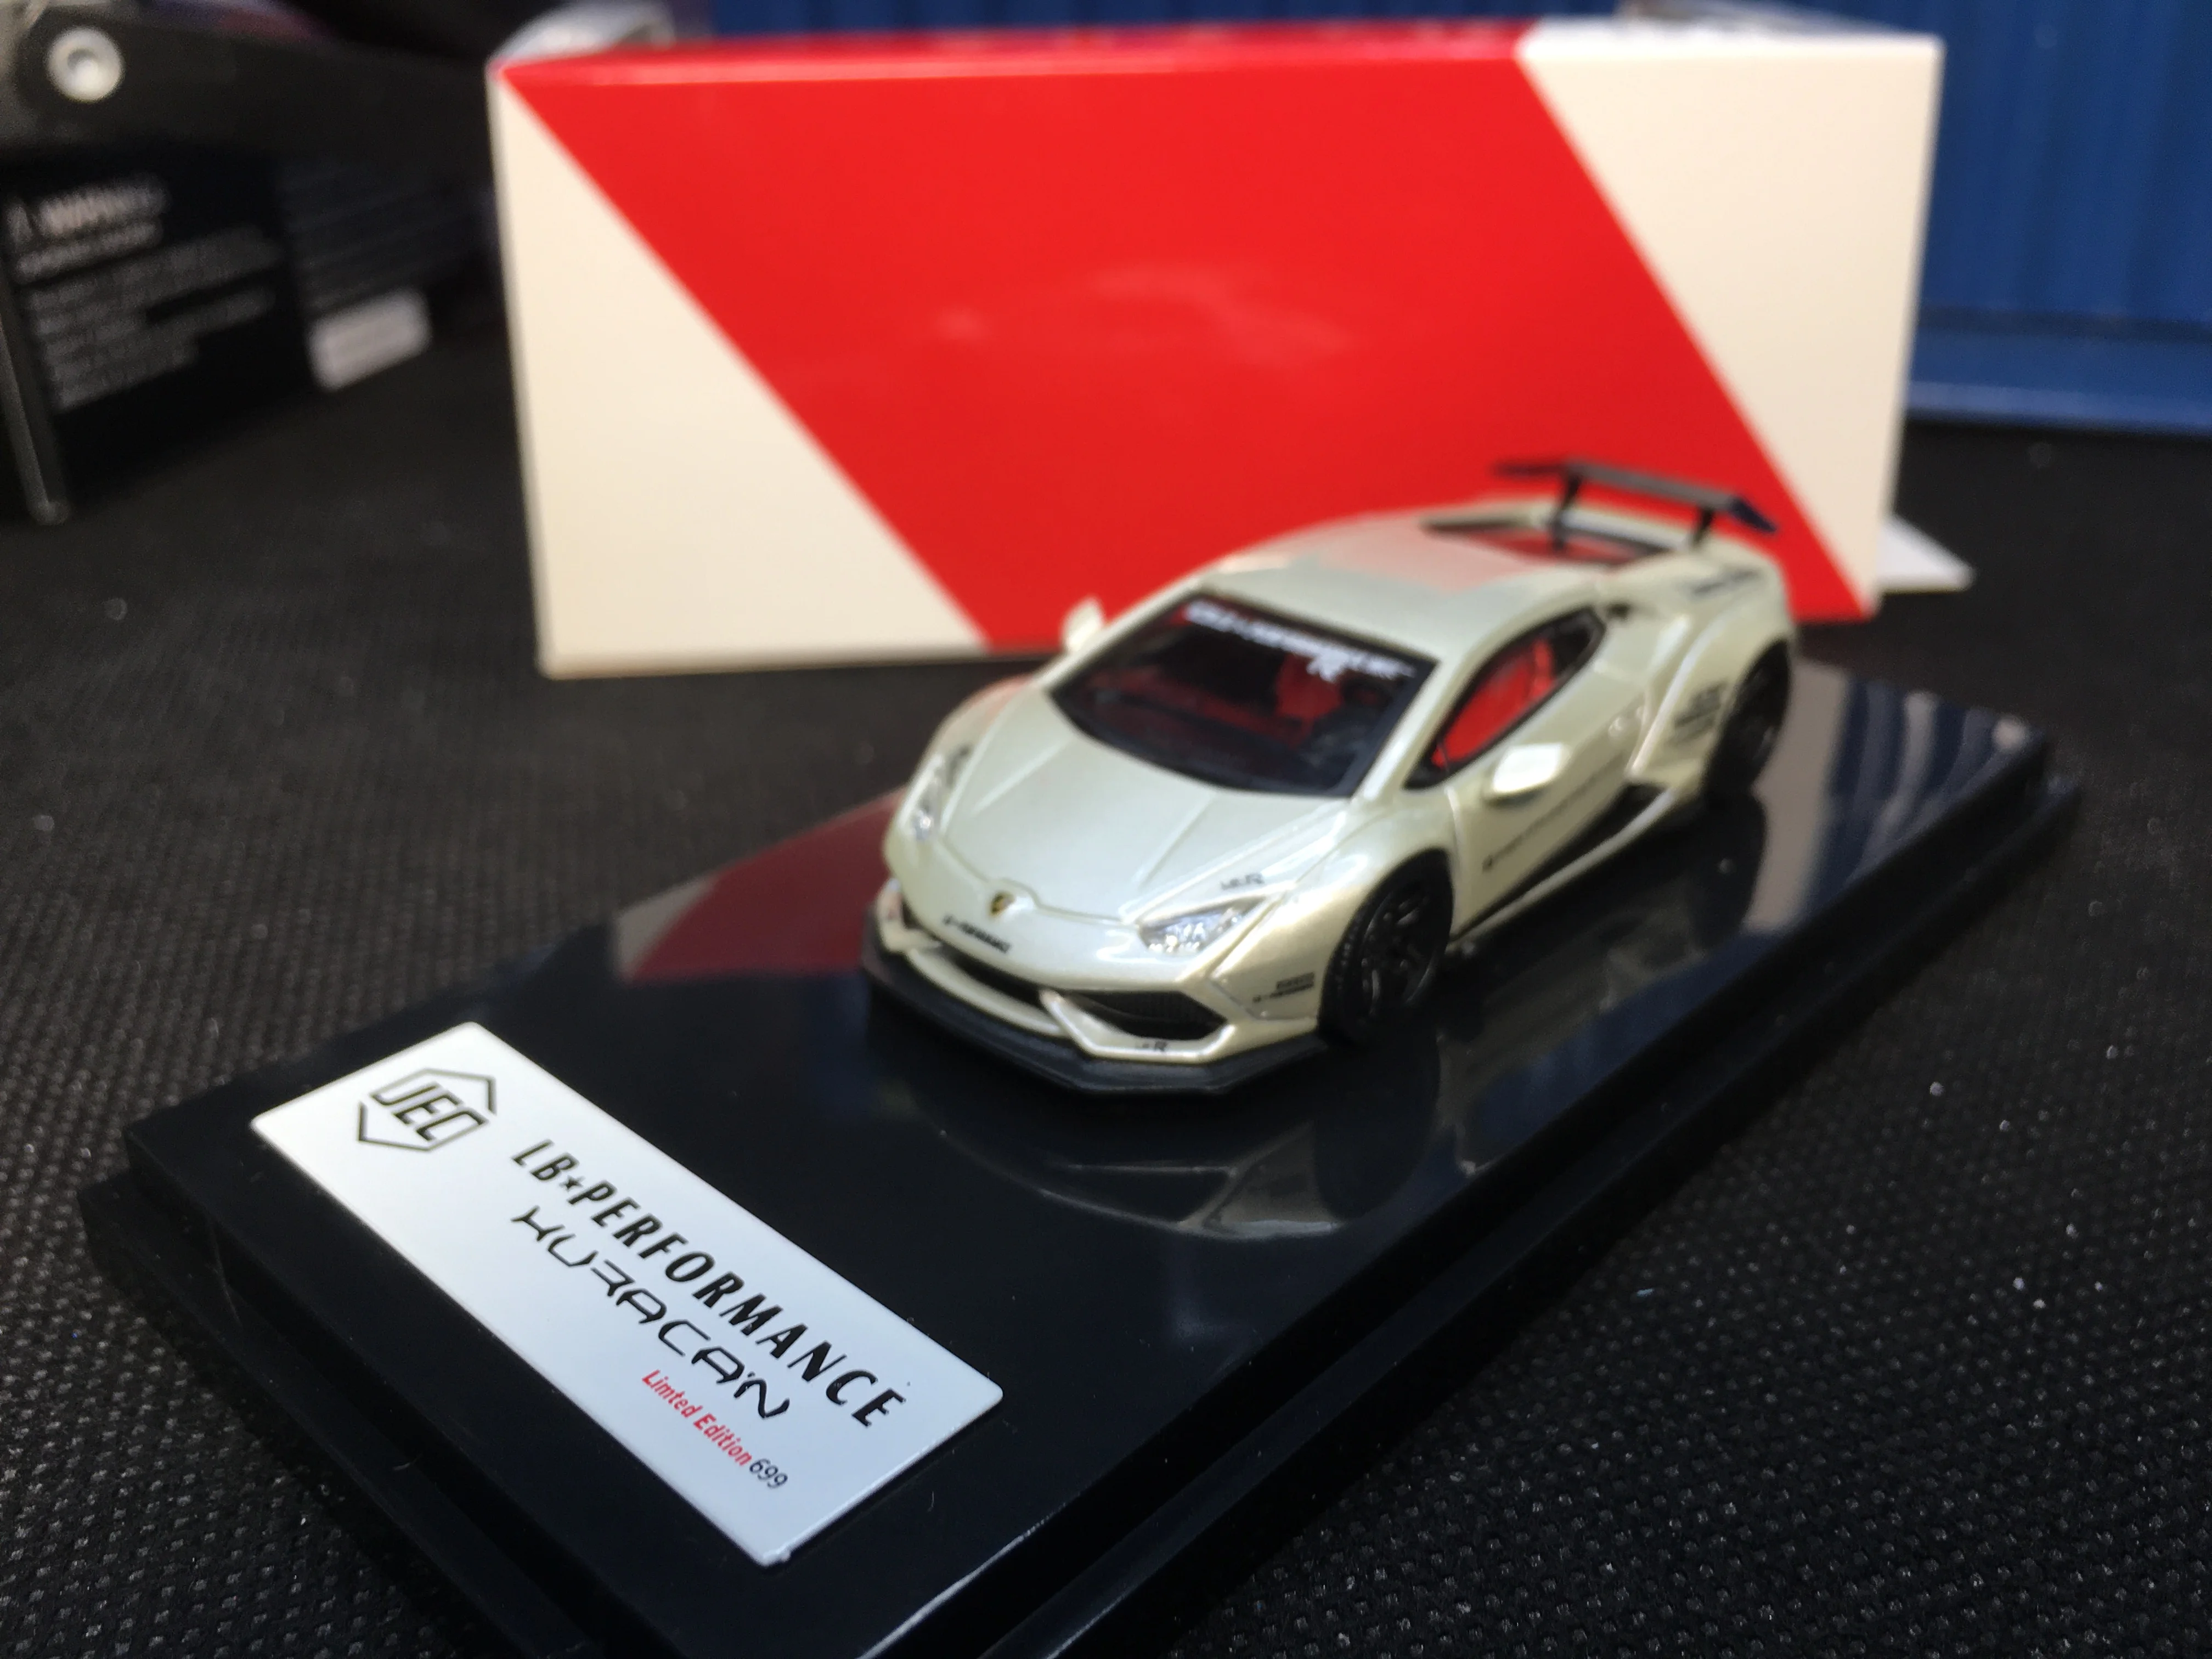 

JEC 1/64 Huracan Liberty Walk LBWK J64-003-PW Die Cast Model Car Collection Limited